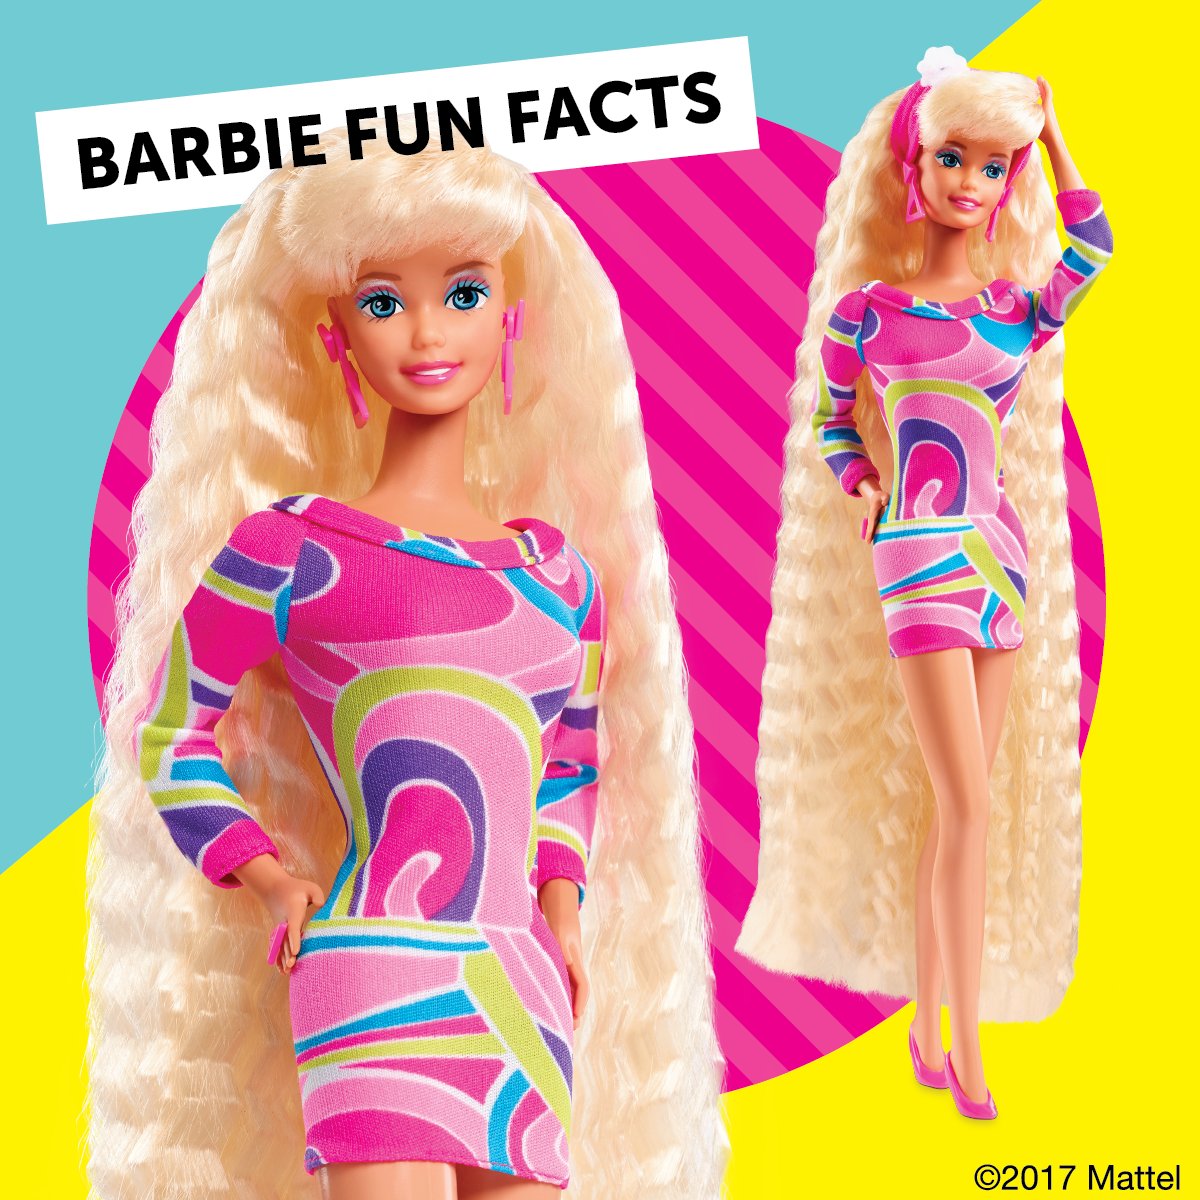 Arbejdskraft Telegraf mount Barbie on Twitter: "With hair from the top of her head to the tip of her  toes, 1992's Totally Hair #Barbie is the best-selling doll ever! #TBT  https://t.co/ka1LkU4dTm" / Twitter